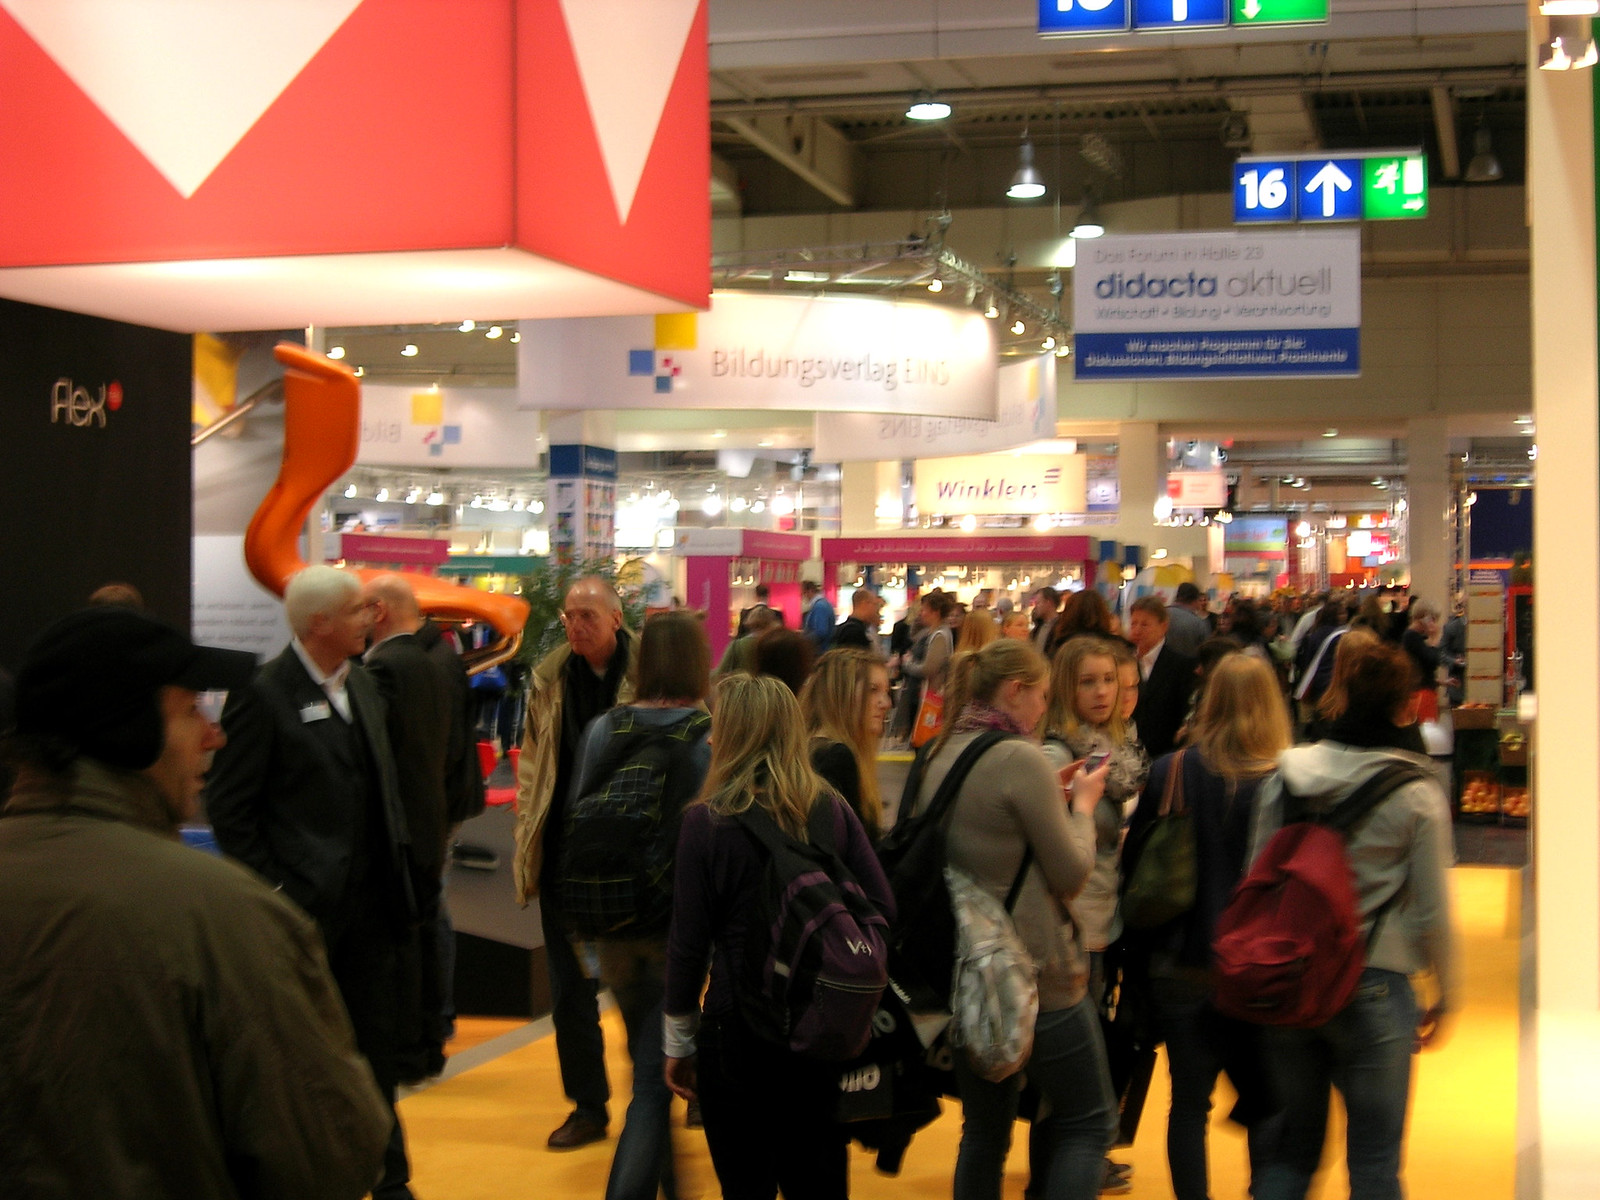 Crowds of people among the stalls at Didacta.